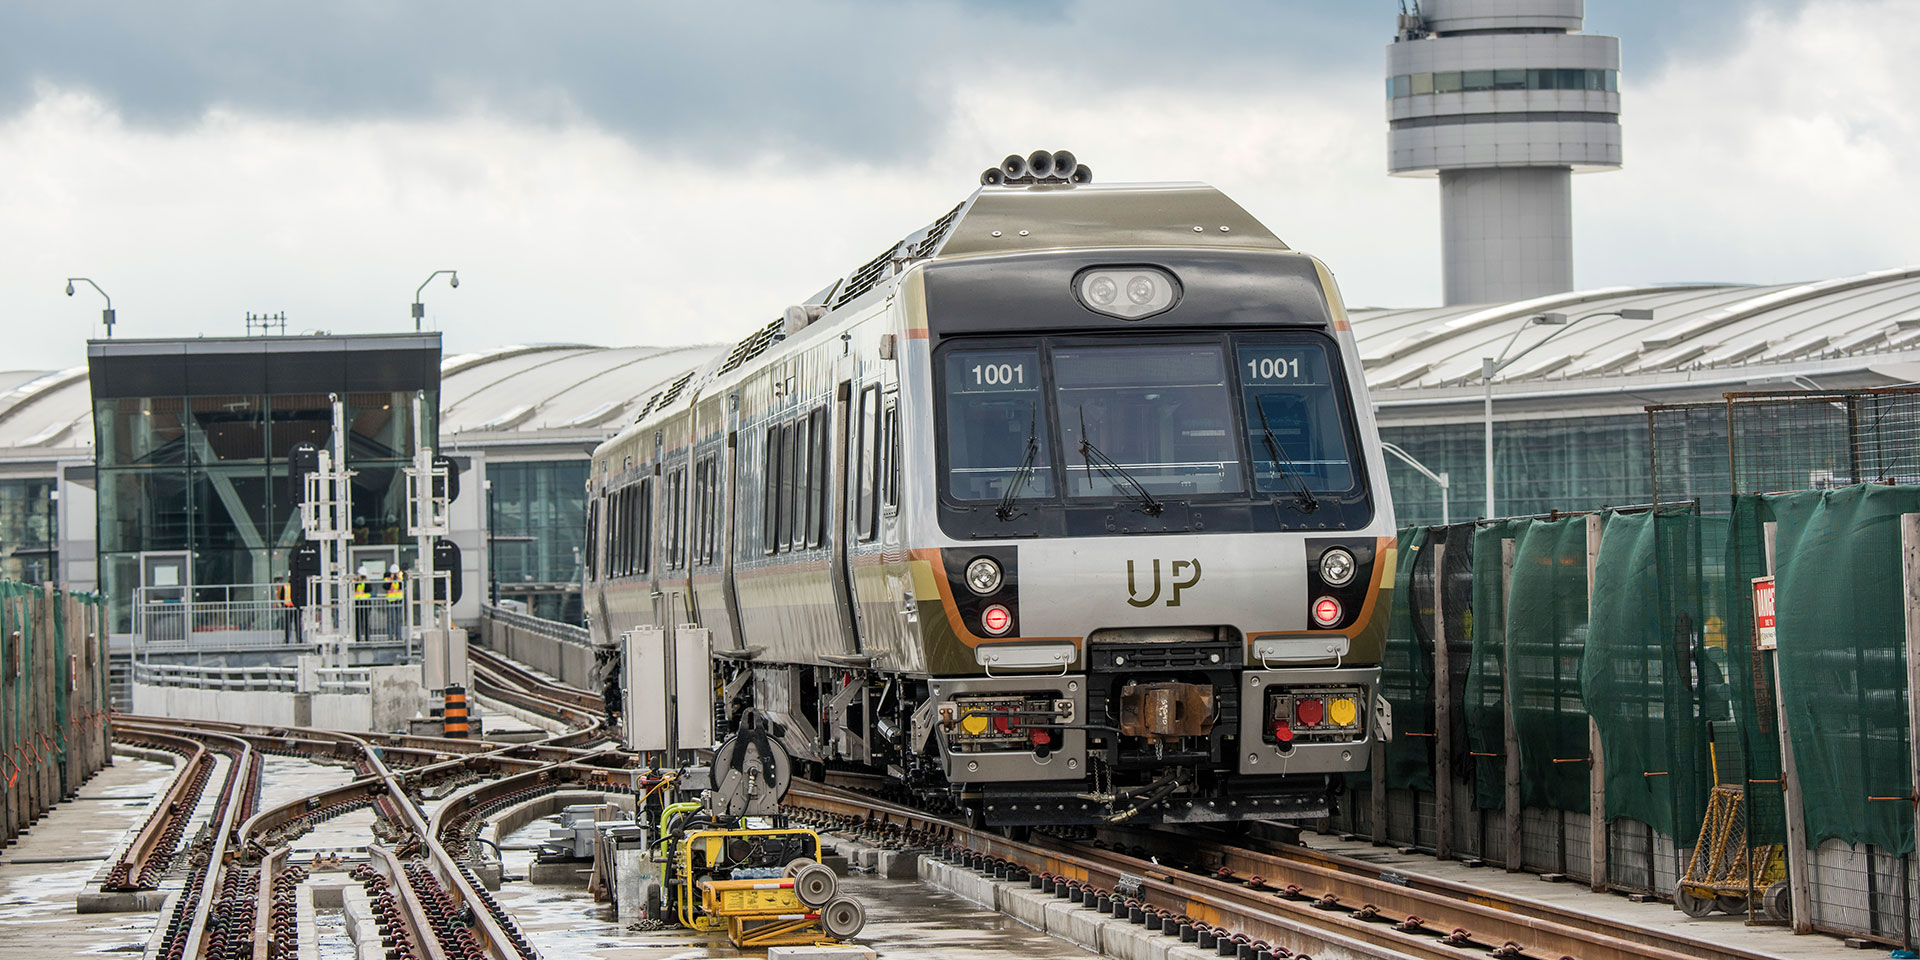 Union-Pearson (UP) Express Front Train